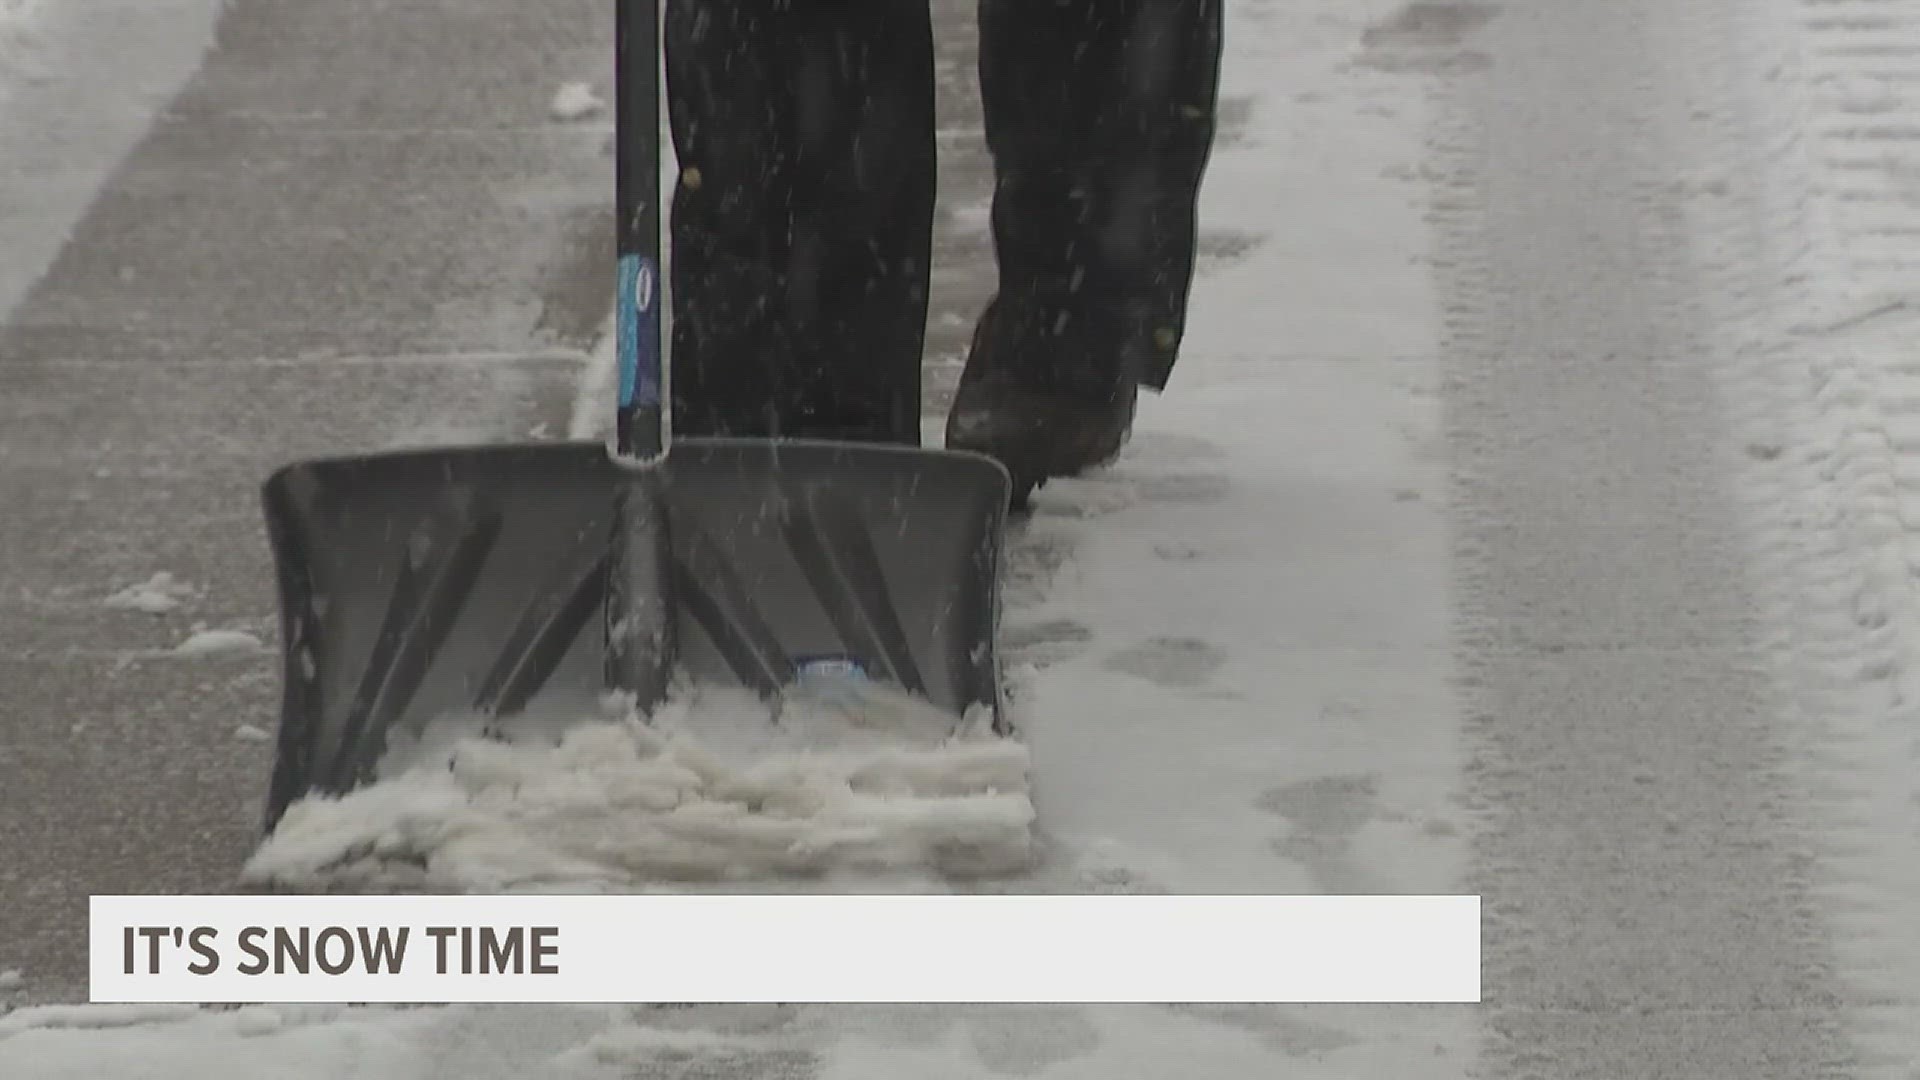 News 8 caught up with people as they were out and about Davenport, shoveling, walking and working.